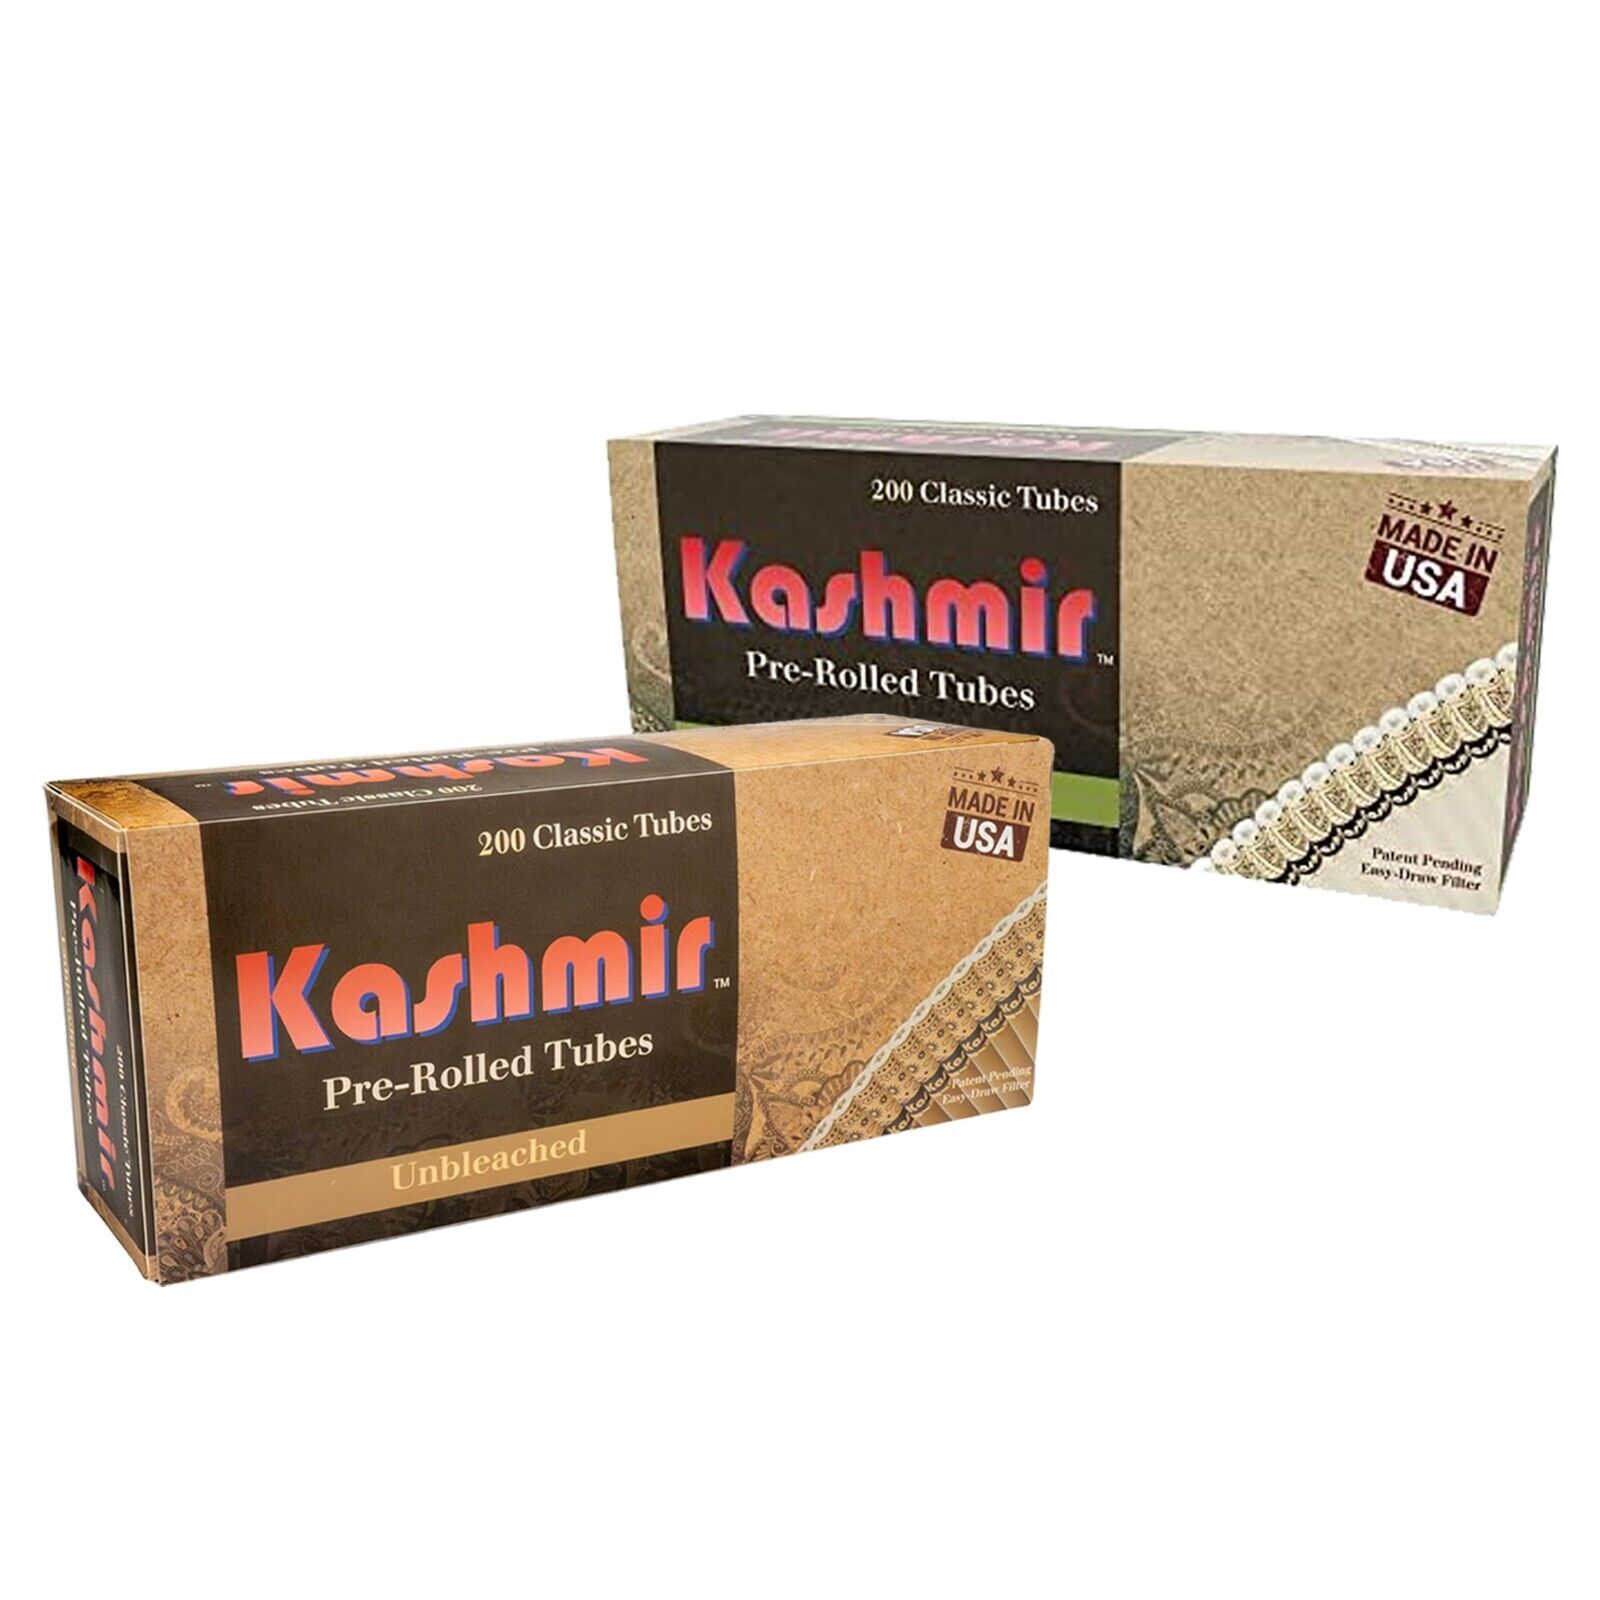 Kashmir Pre-Rolled Tubes Organic & Unbleached Cigarette Tubes Combo Pack: 400 Ct